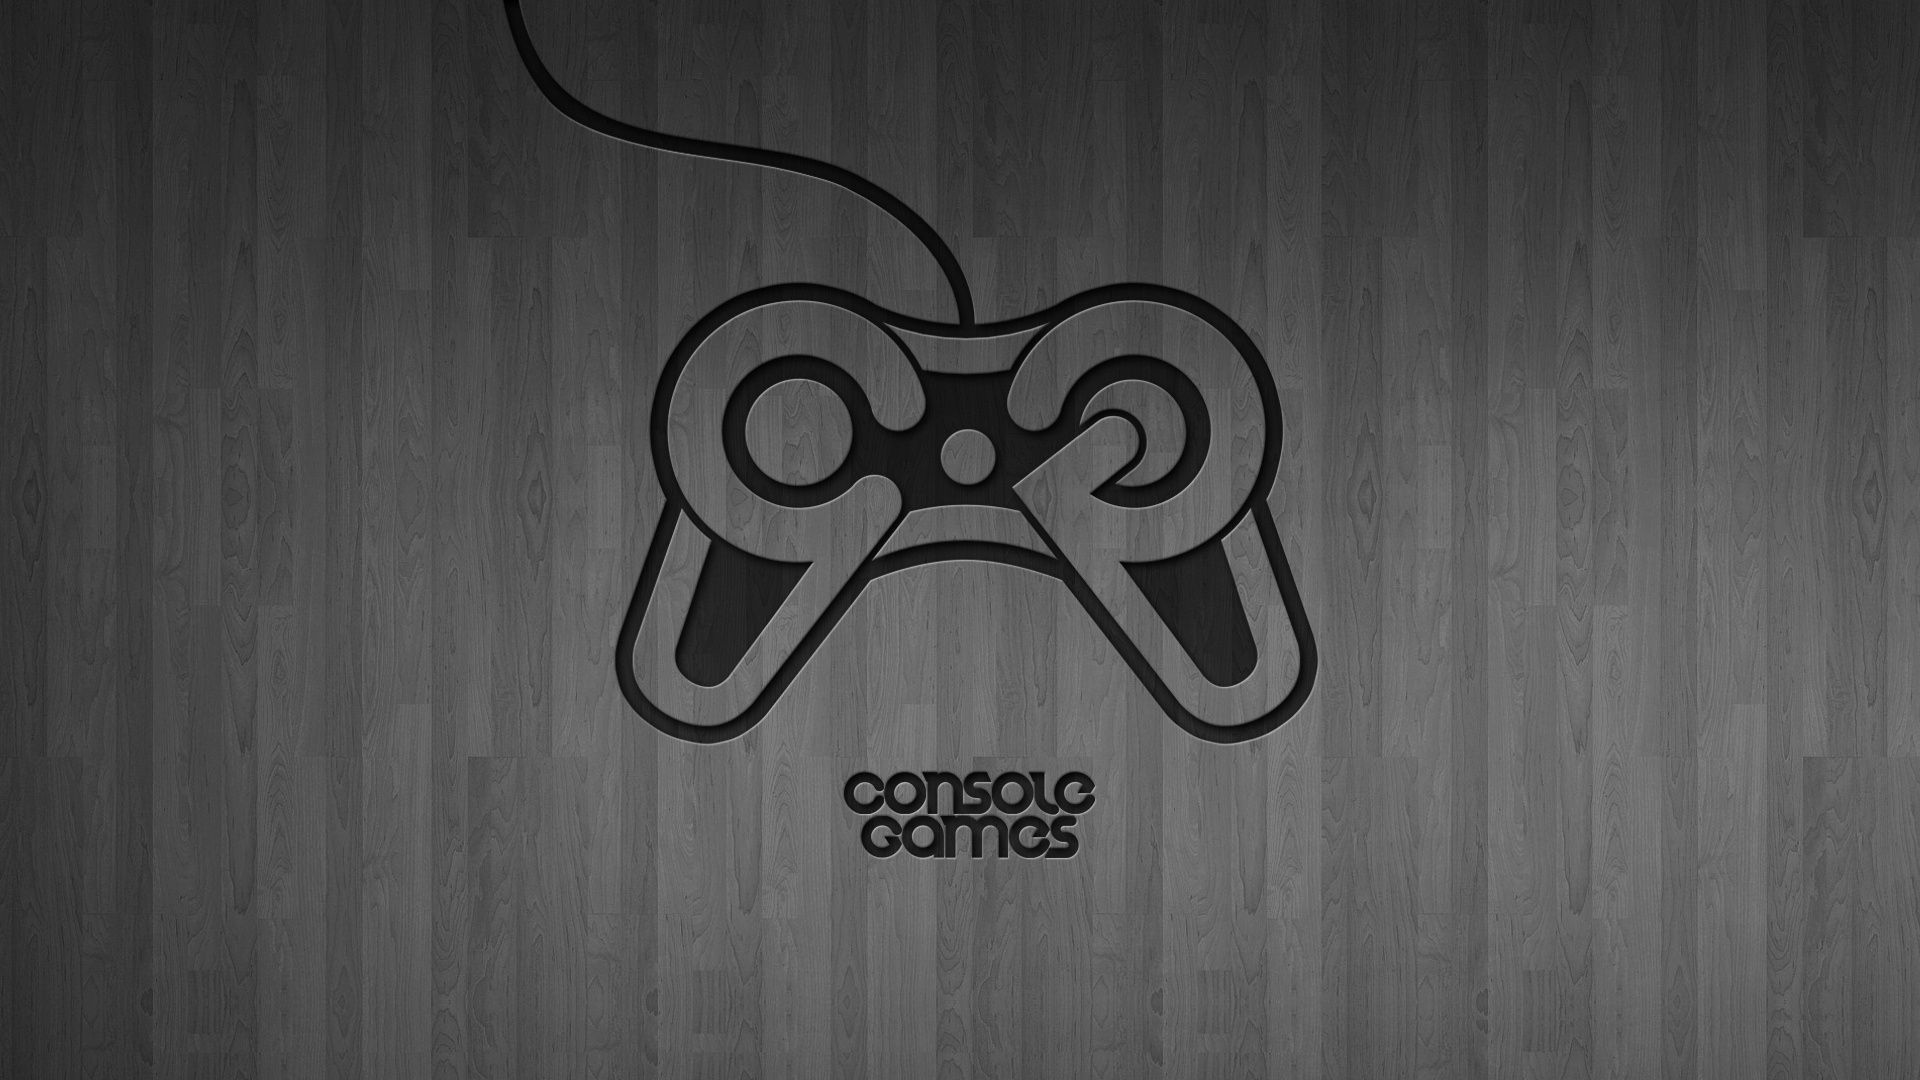 gaming console backgrounds hd